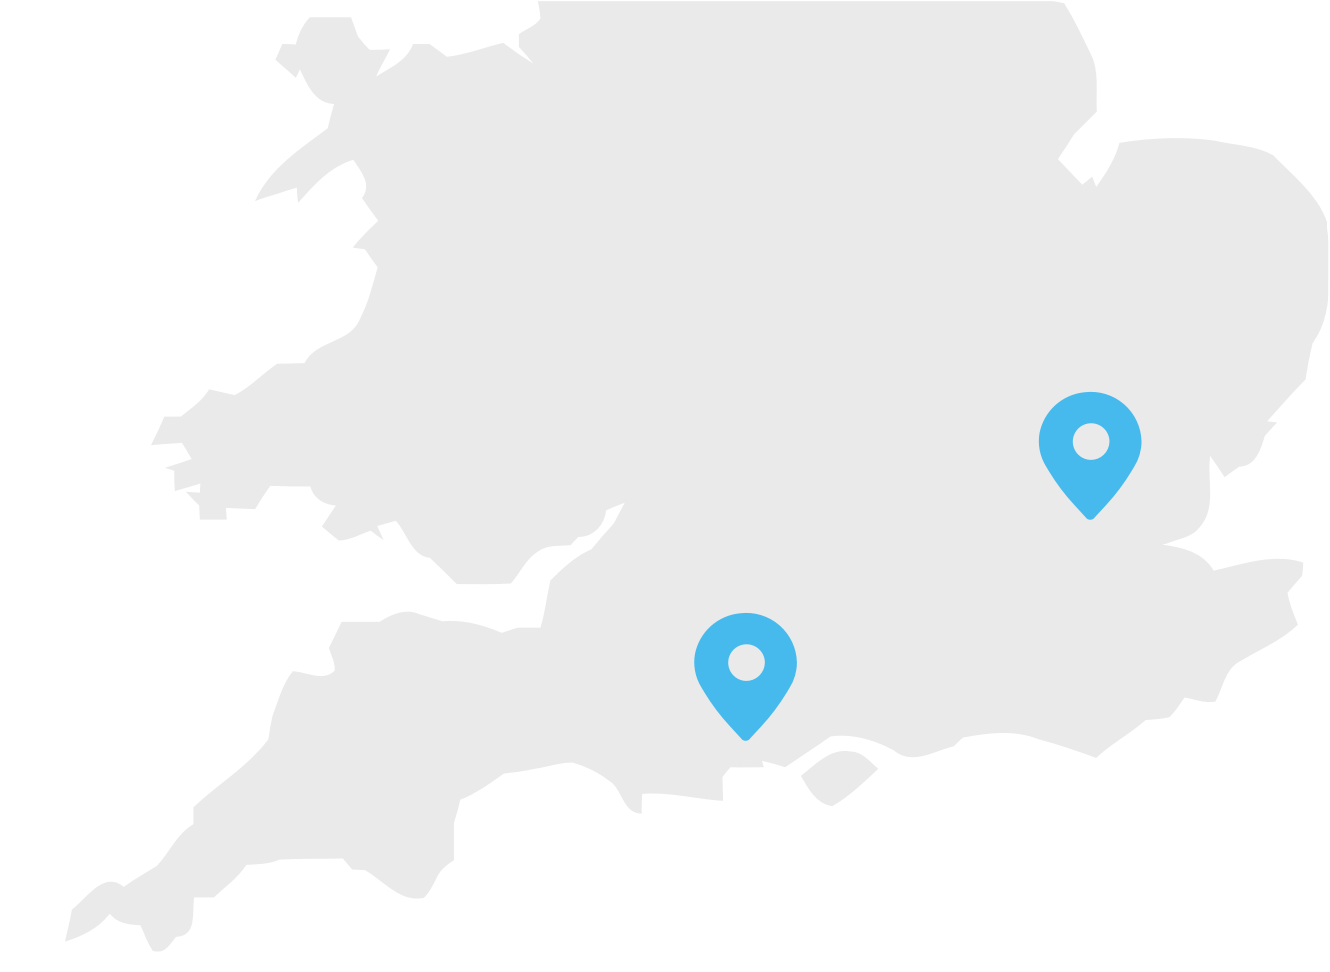 Vector image map of the South of the UK, with two location pins on it.